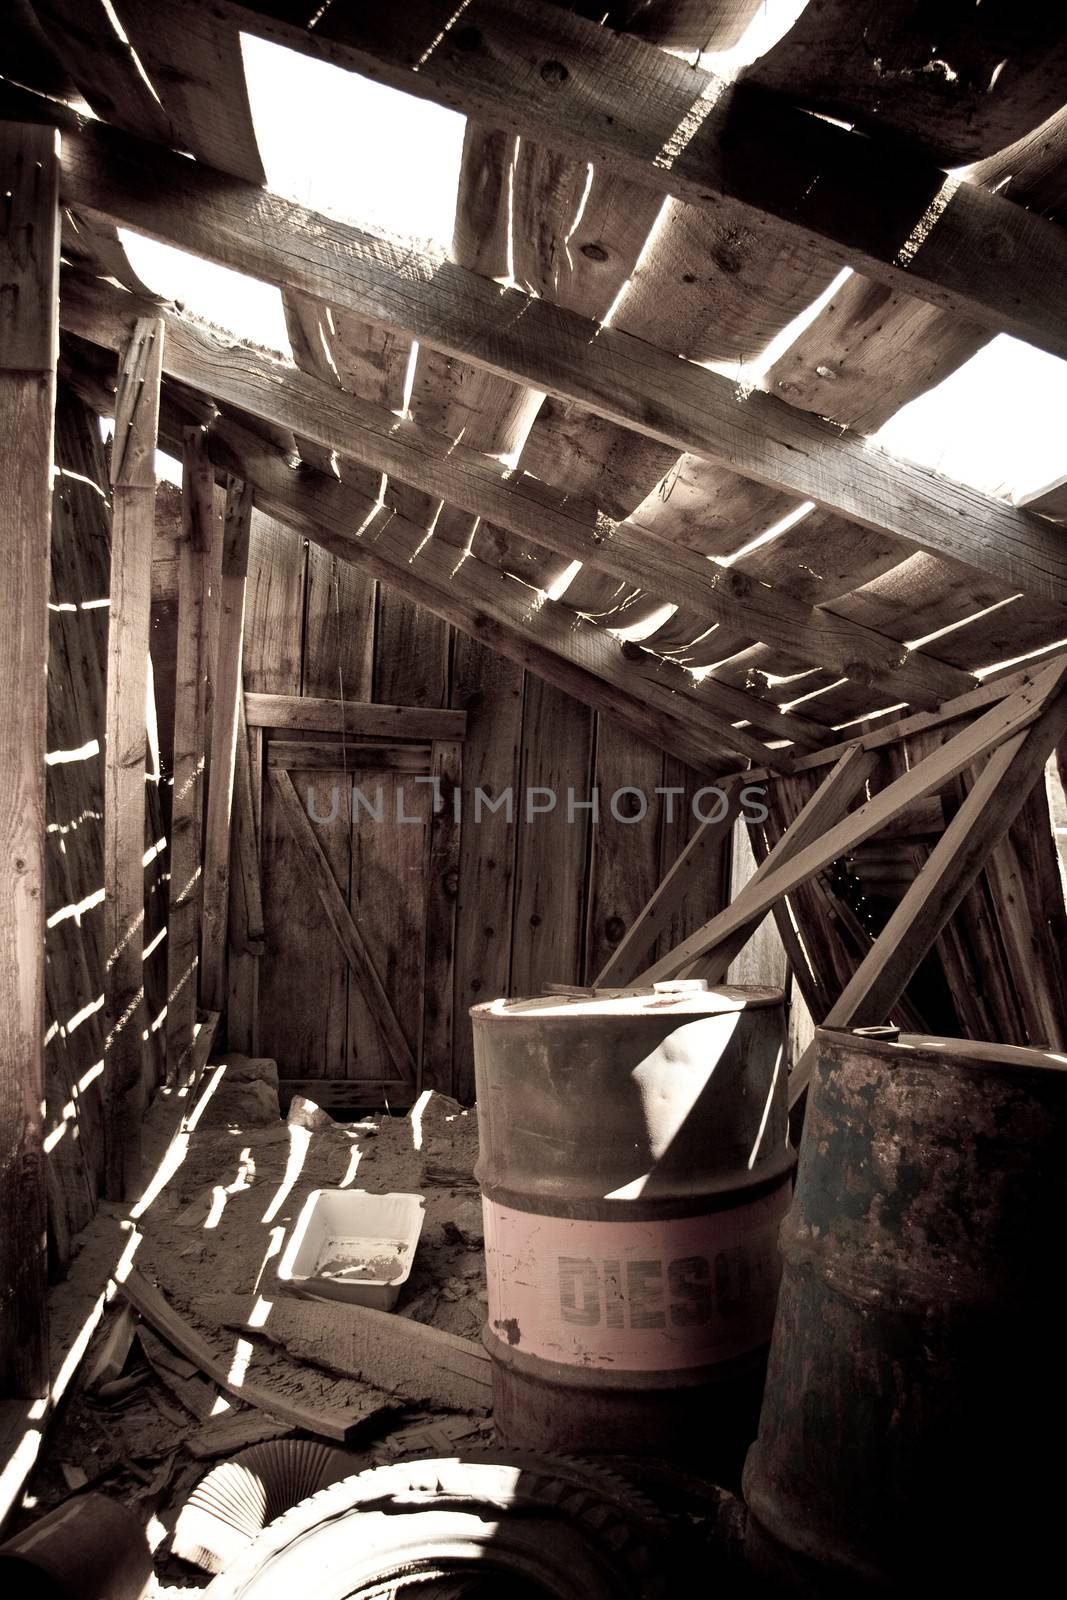 Interior of old wooden building in Bodie State Historic Park, California, U.S.A.